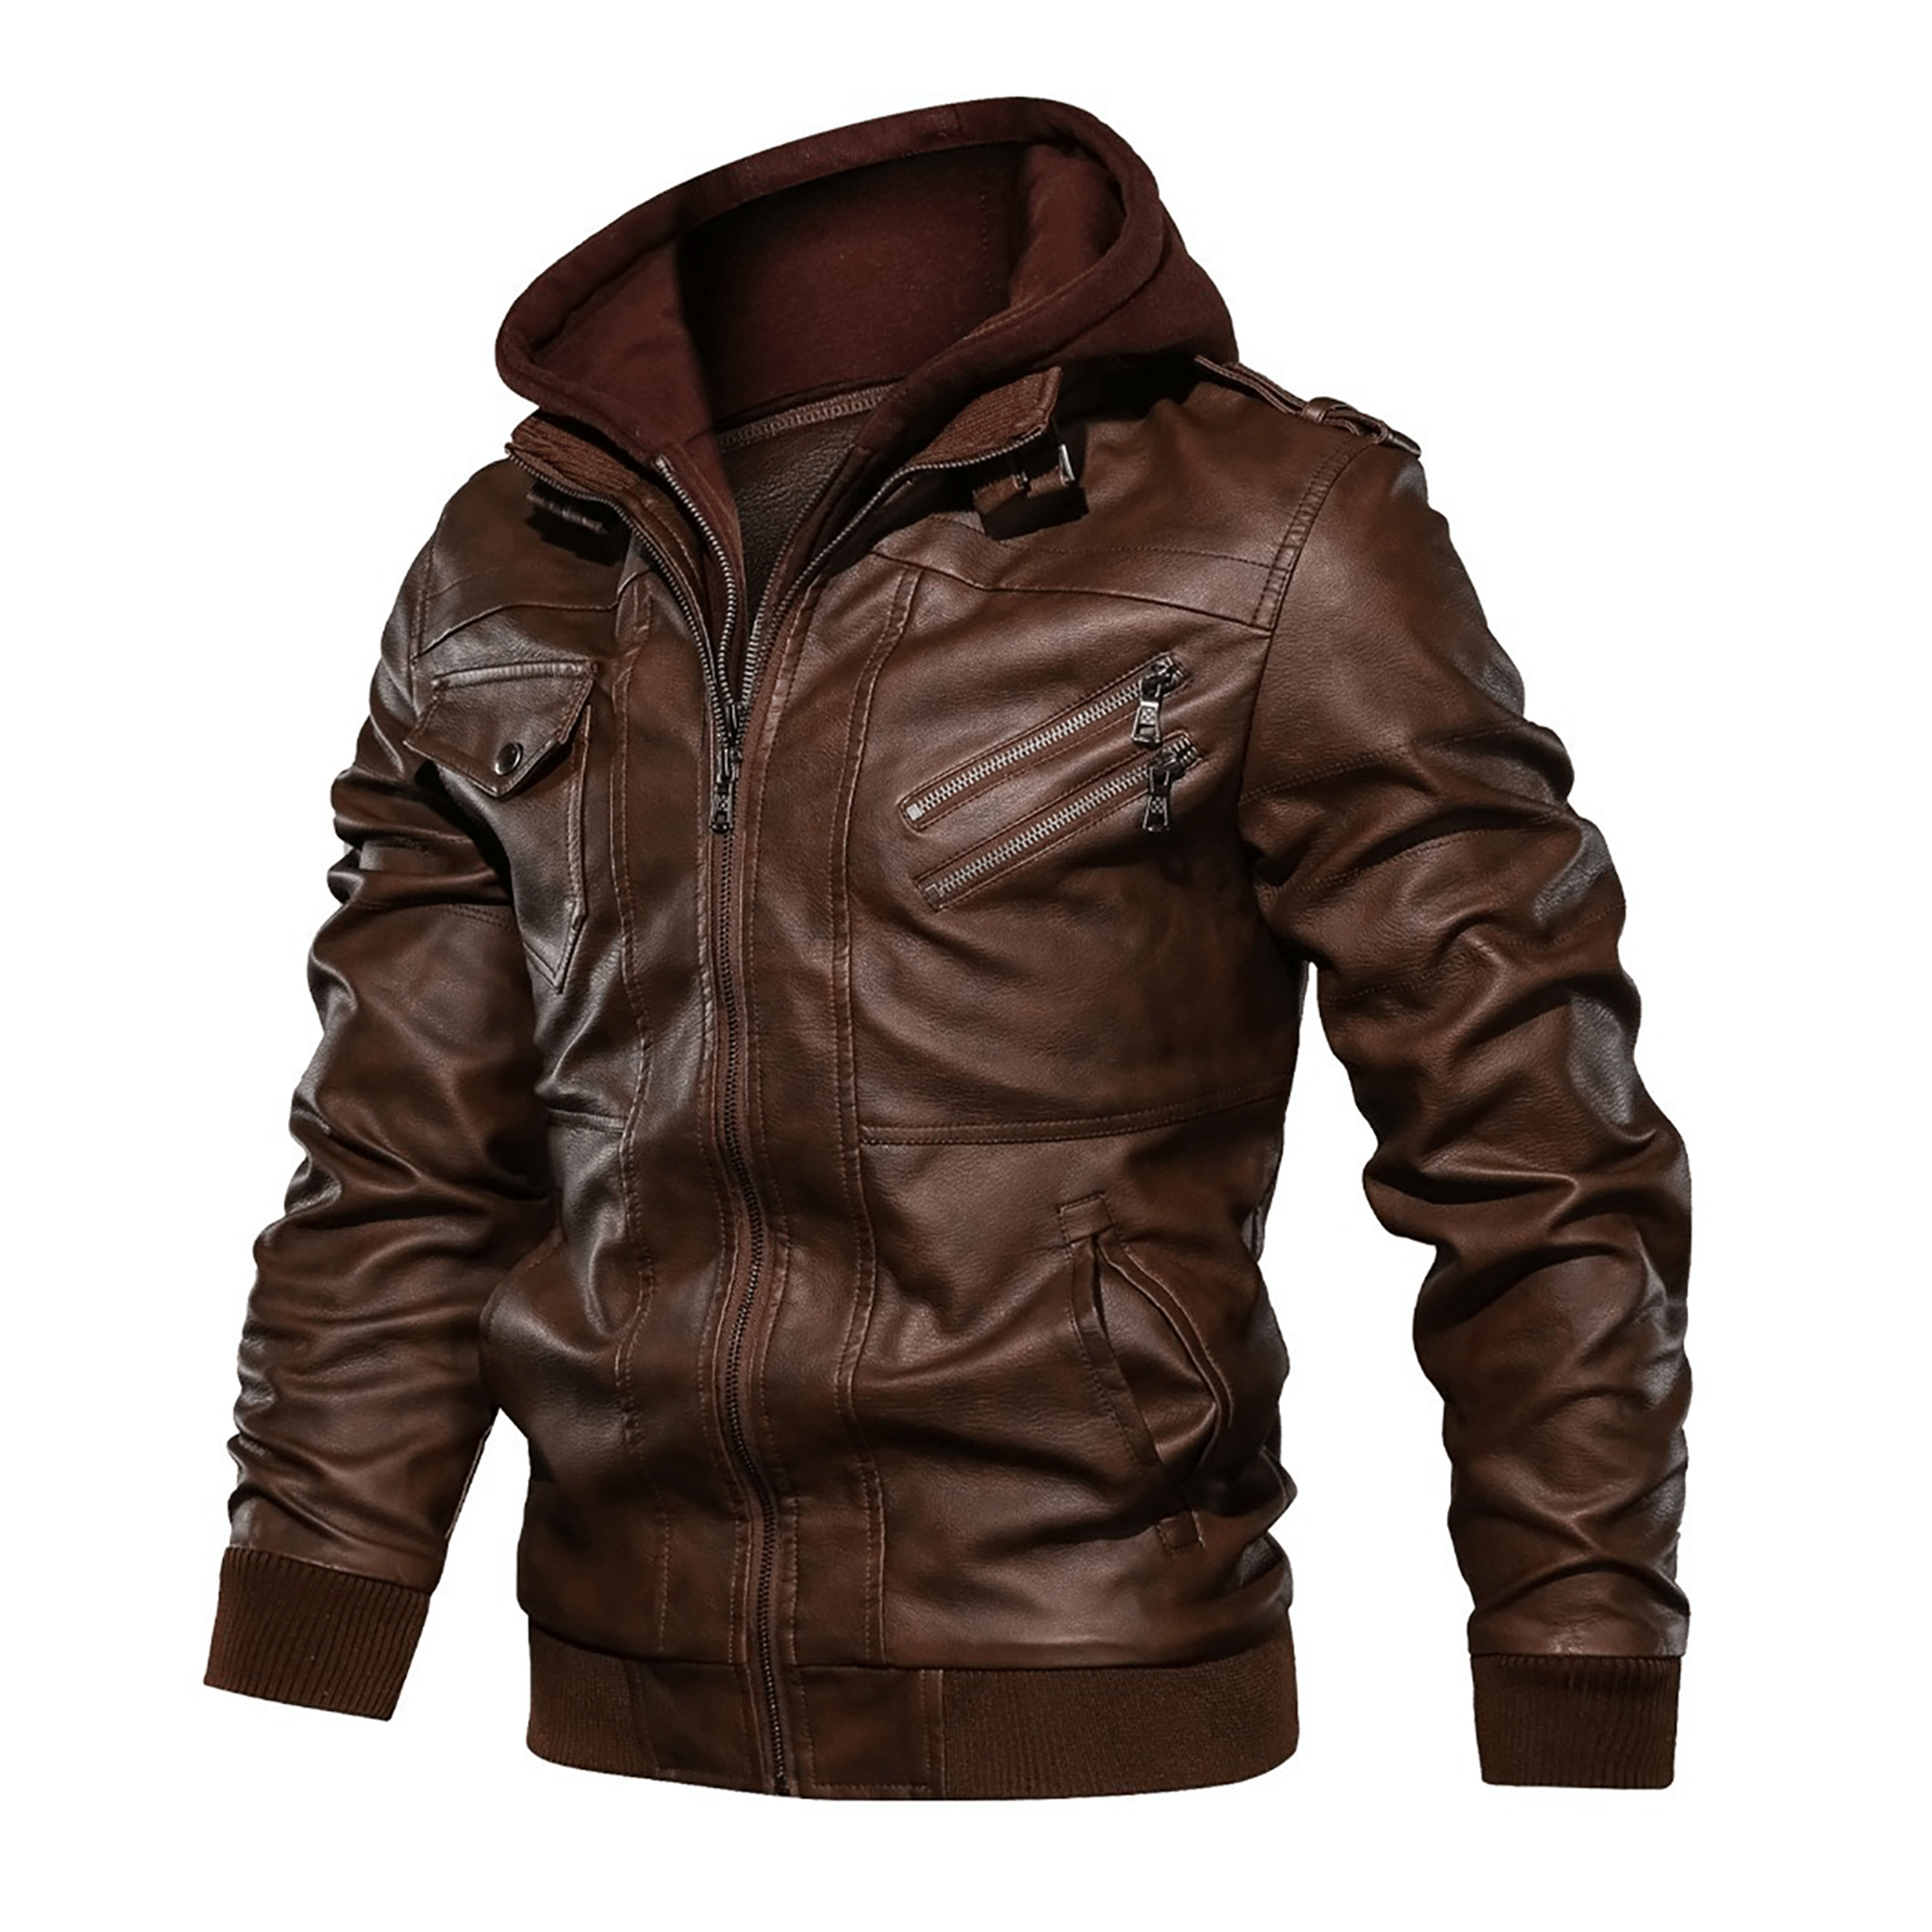 Top leather jackets and latest products 271